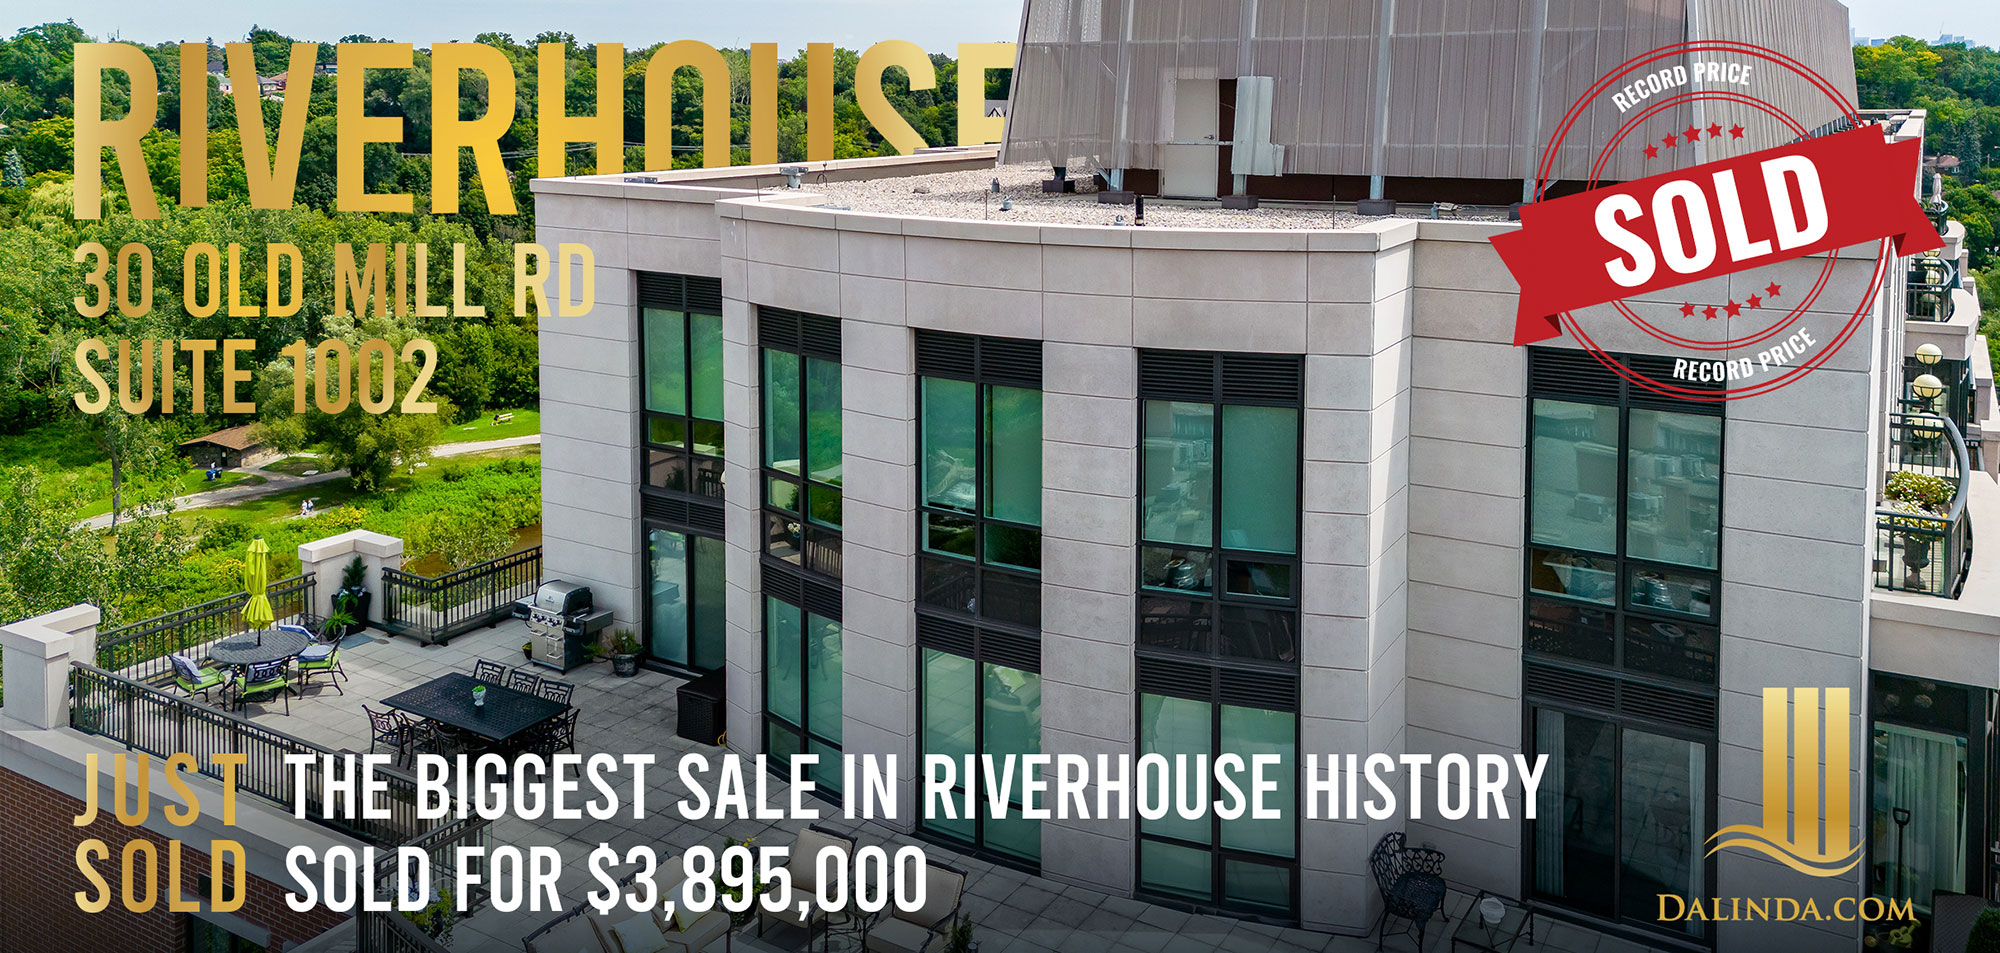 The biggest sale in riverhouse history